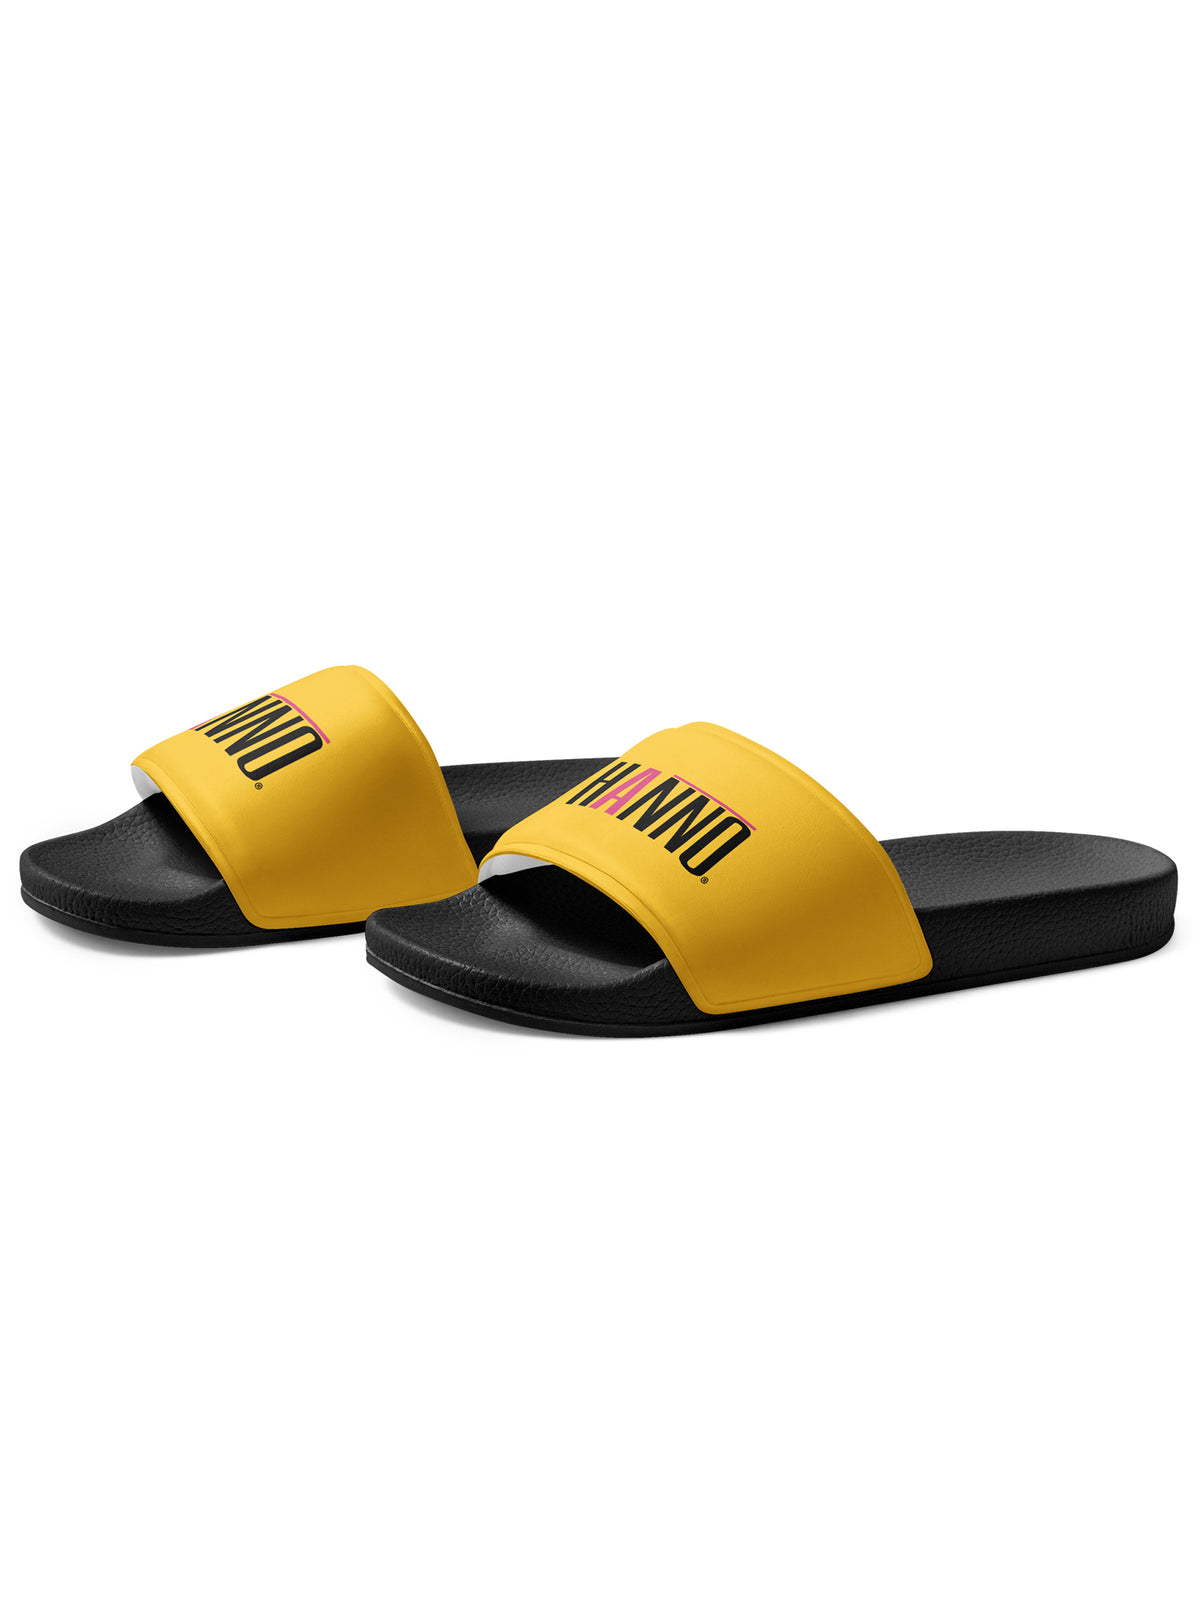 HANNO YELLOW SLIDES FOR HER